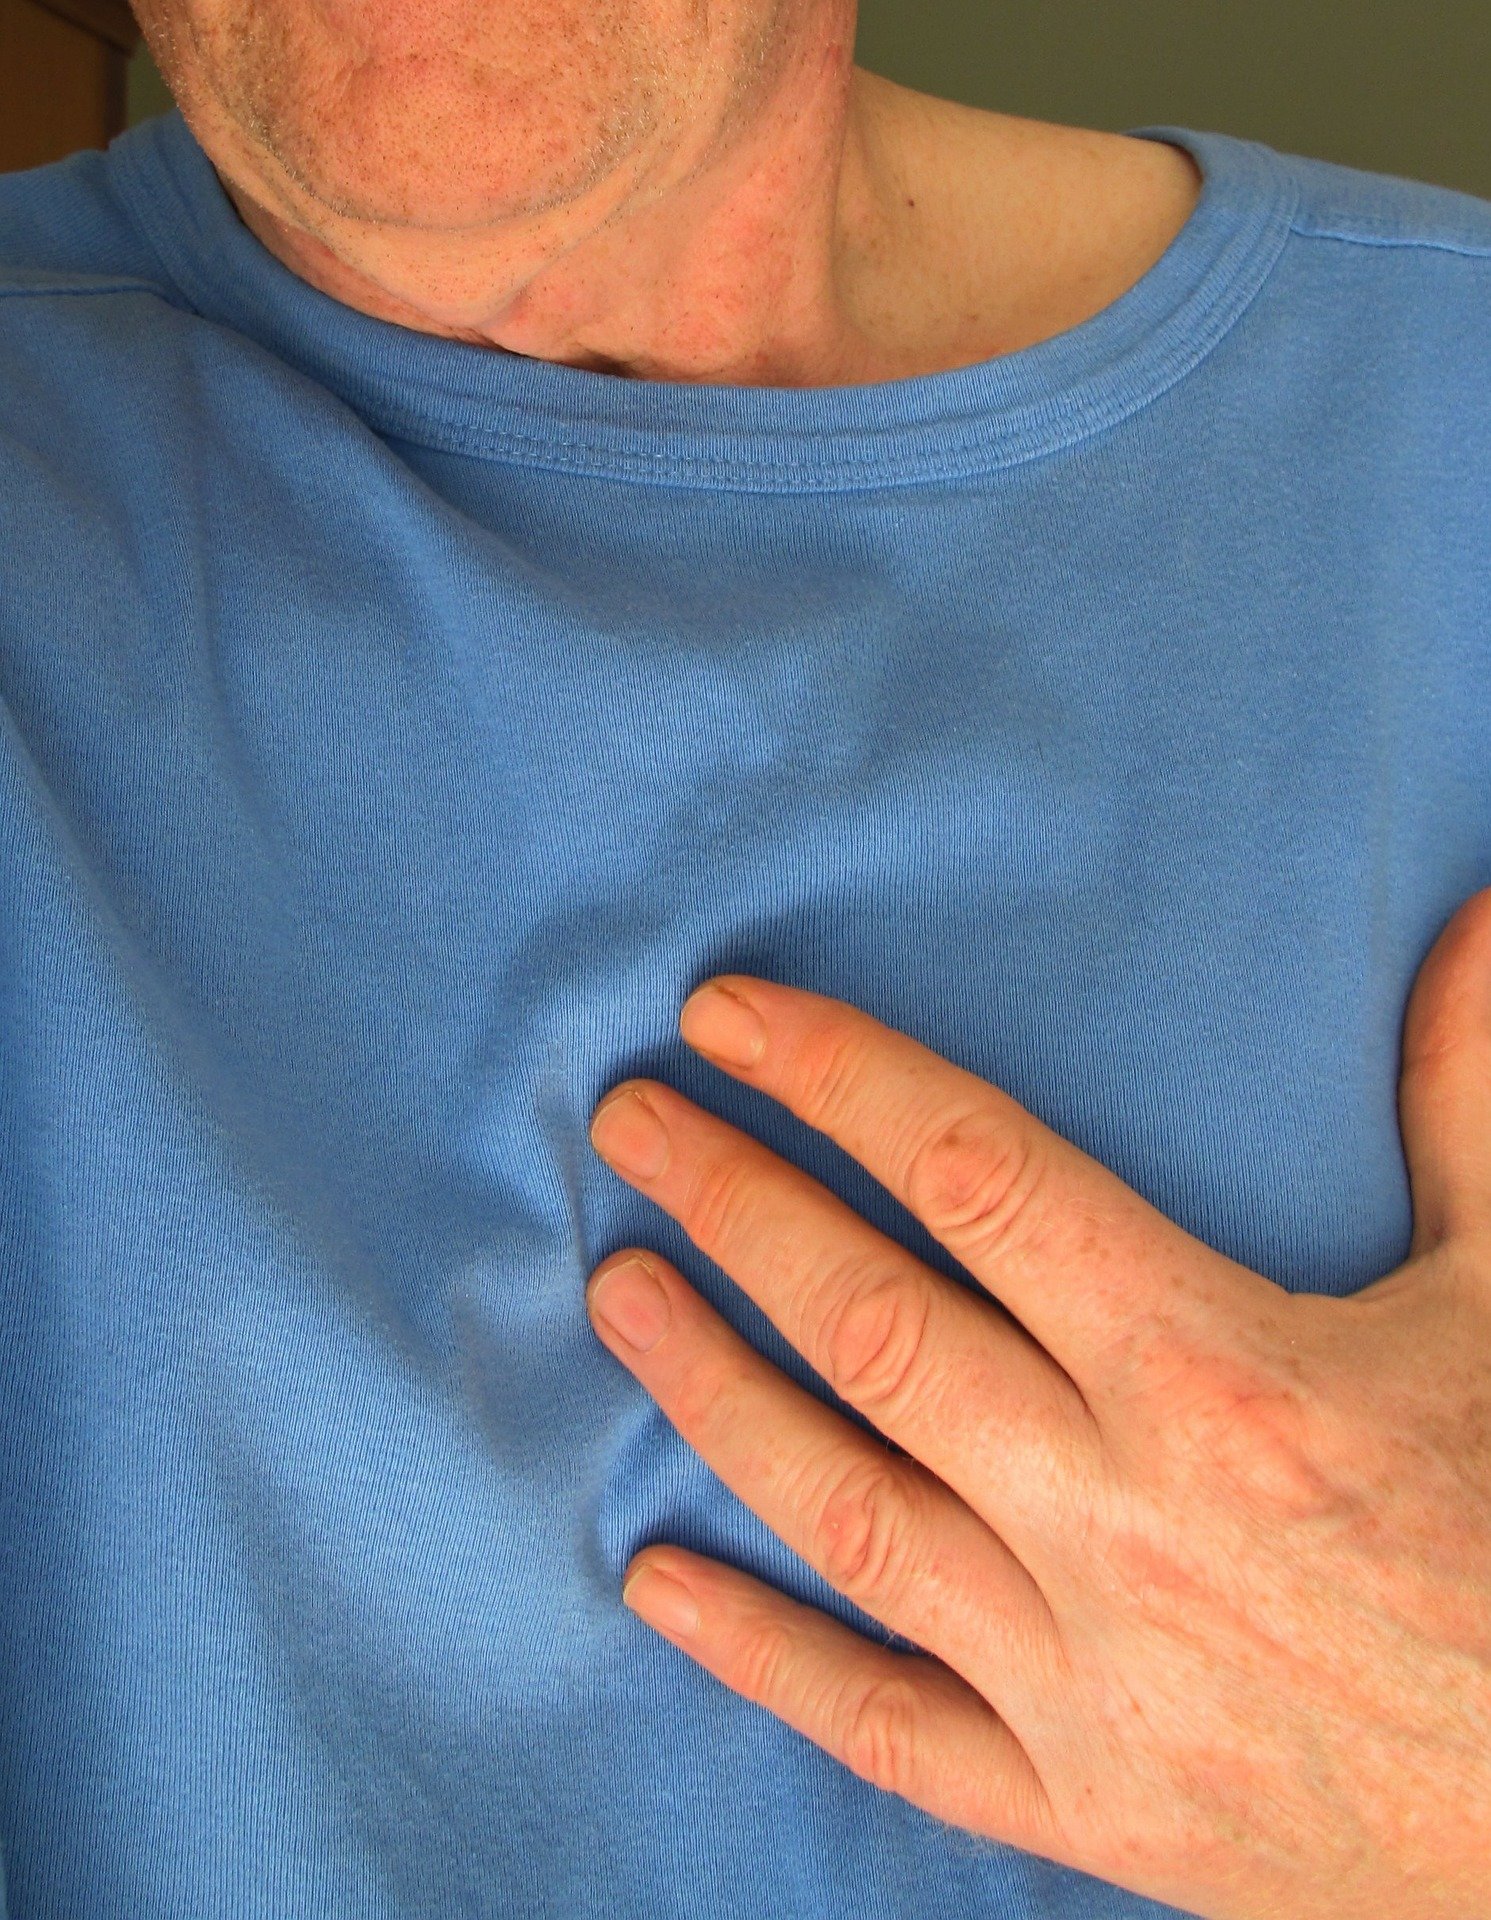 #Study finds large differences in heart attack care across six high income countries